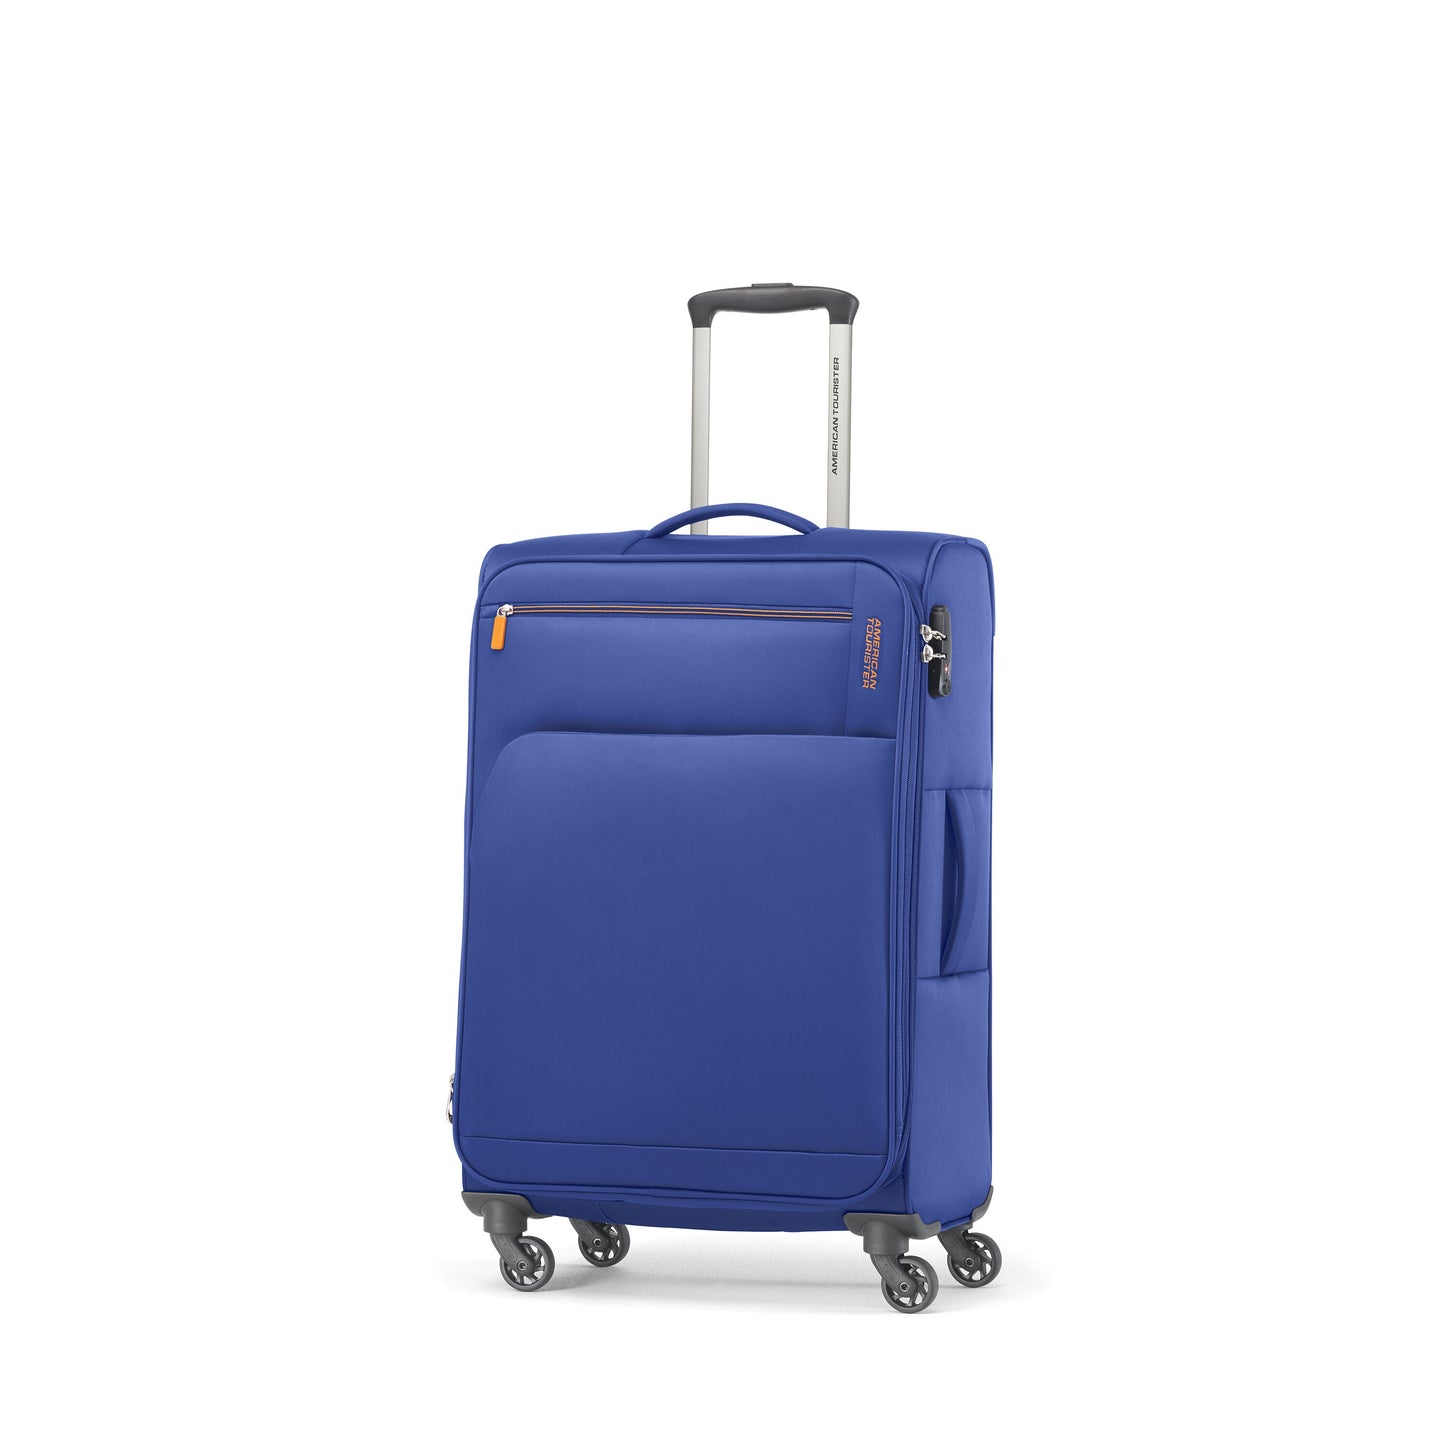 American Tourister Bayview NXT Spinner Softside Medium Luggage - Imperial Blue